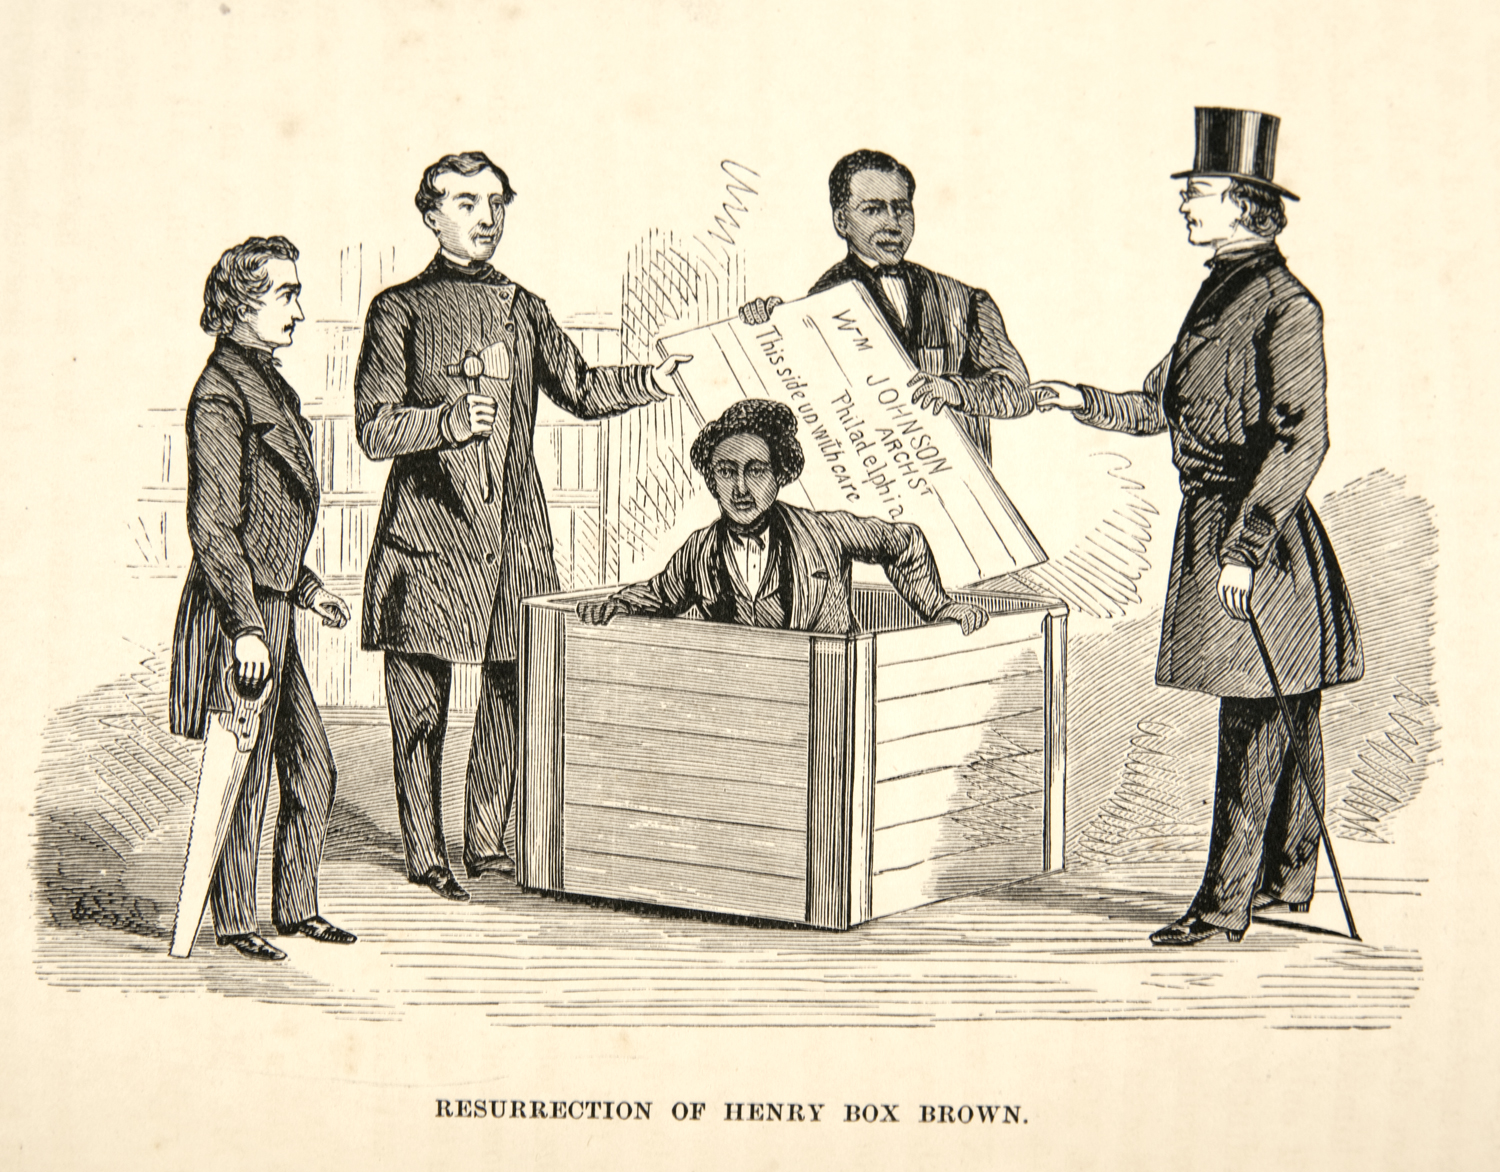 After an 1851 lithograph by Peter Kramer, Resurrection of Henry Box Brown, 1872, engraving from William Still. The Underground Railroad: A Record of Facts, Authentic Narratives, and Letters, Philadelphia: Porter & Coates, 1872, p. 83 (Newberry Library)